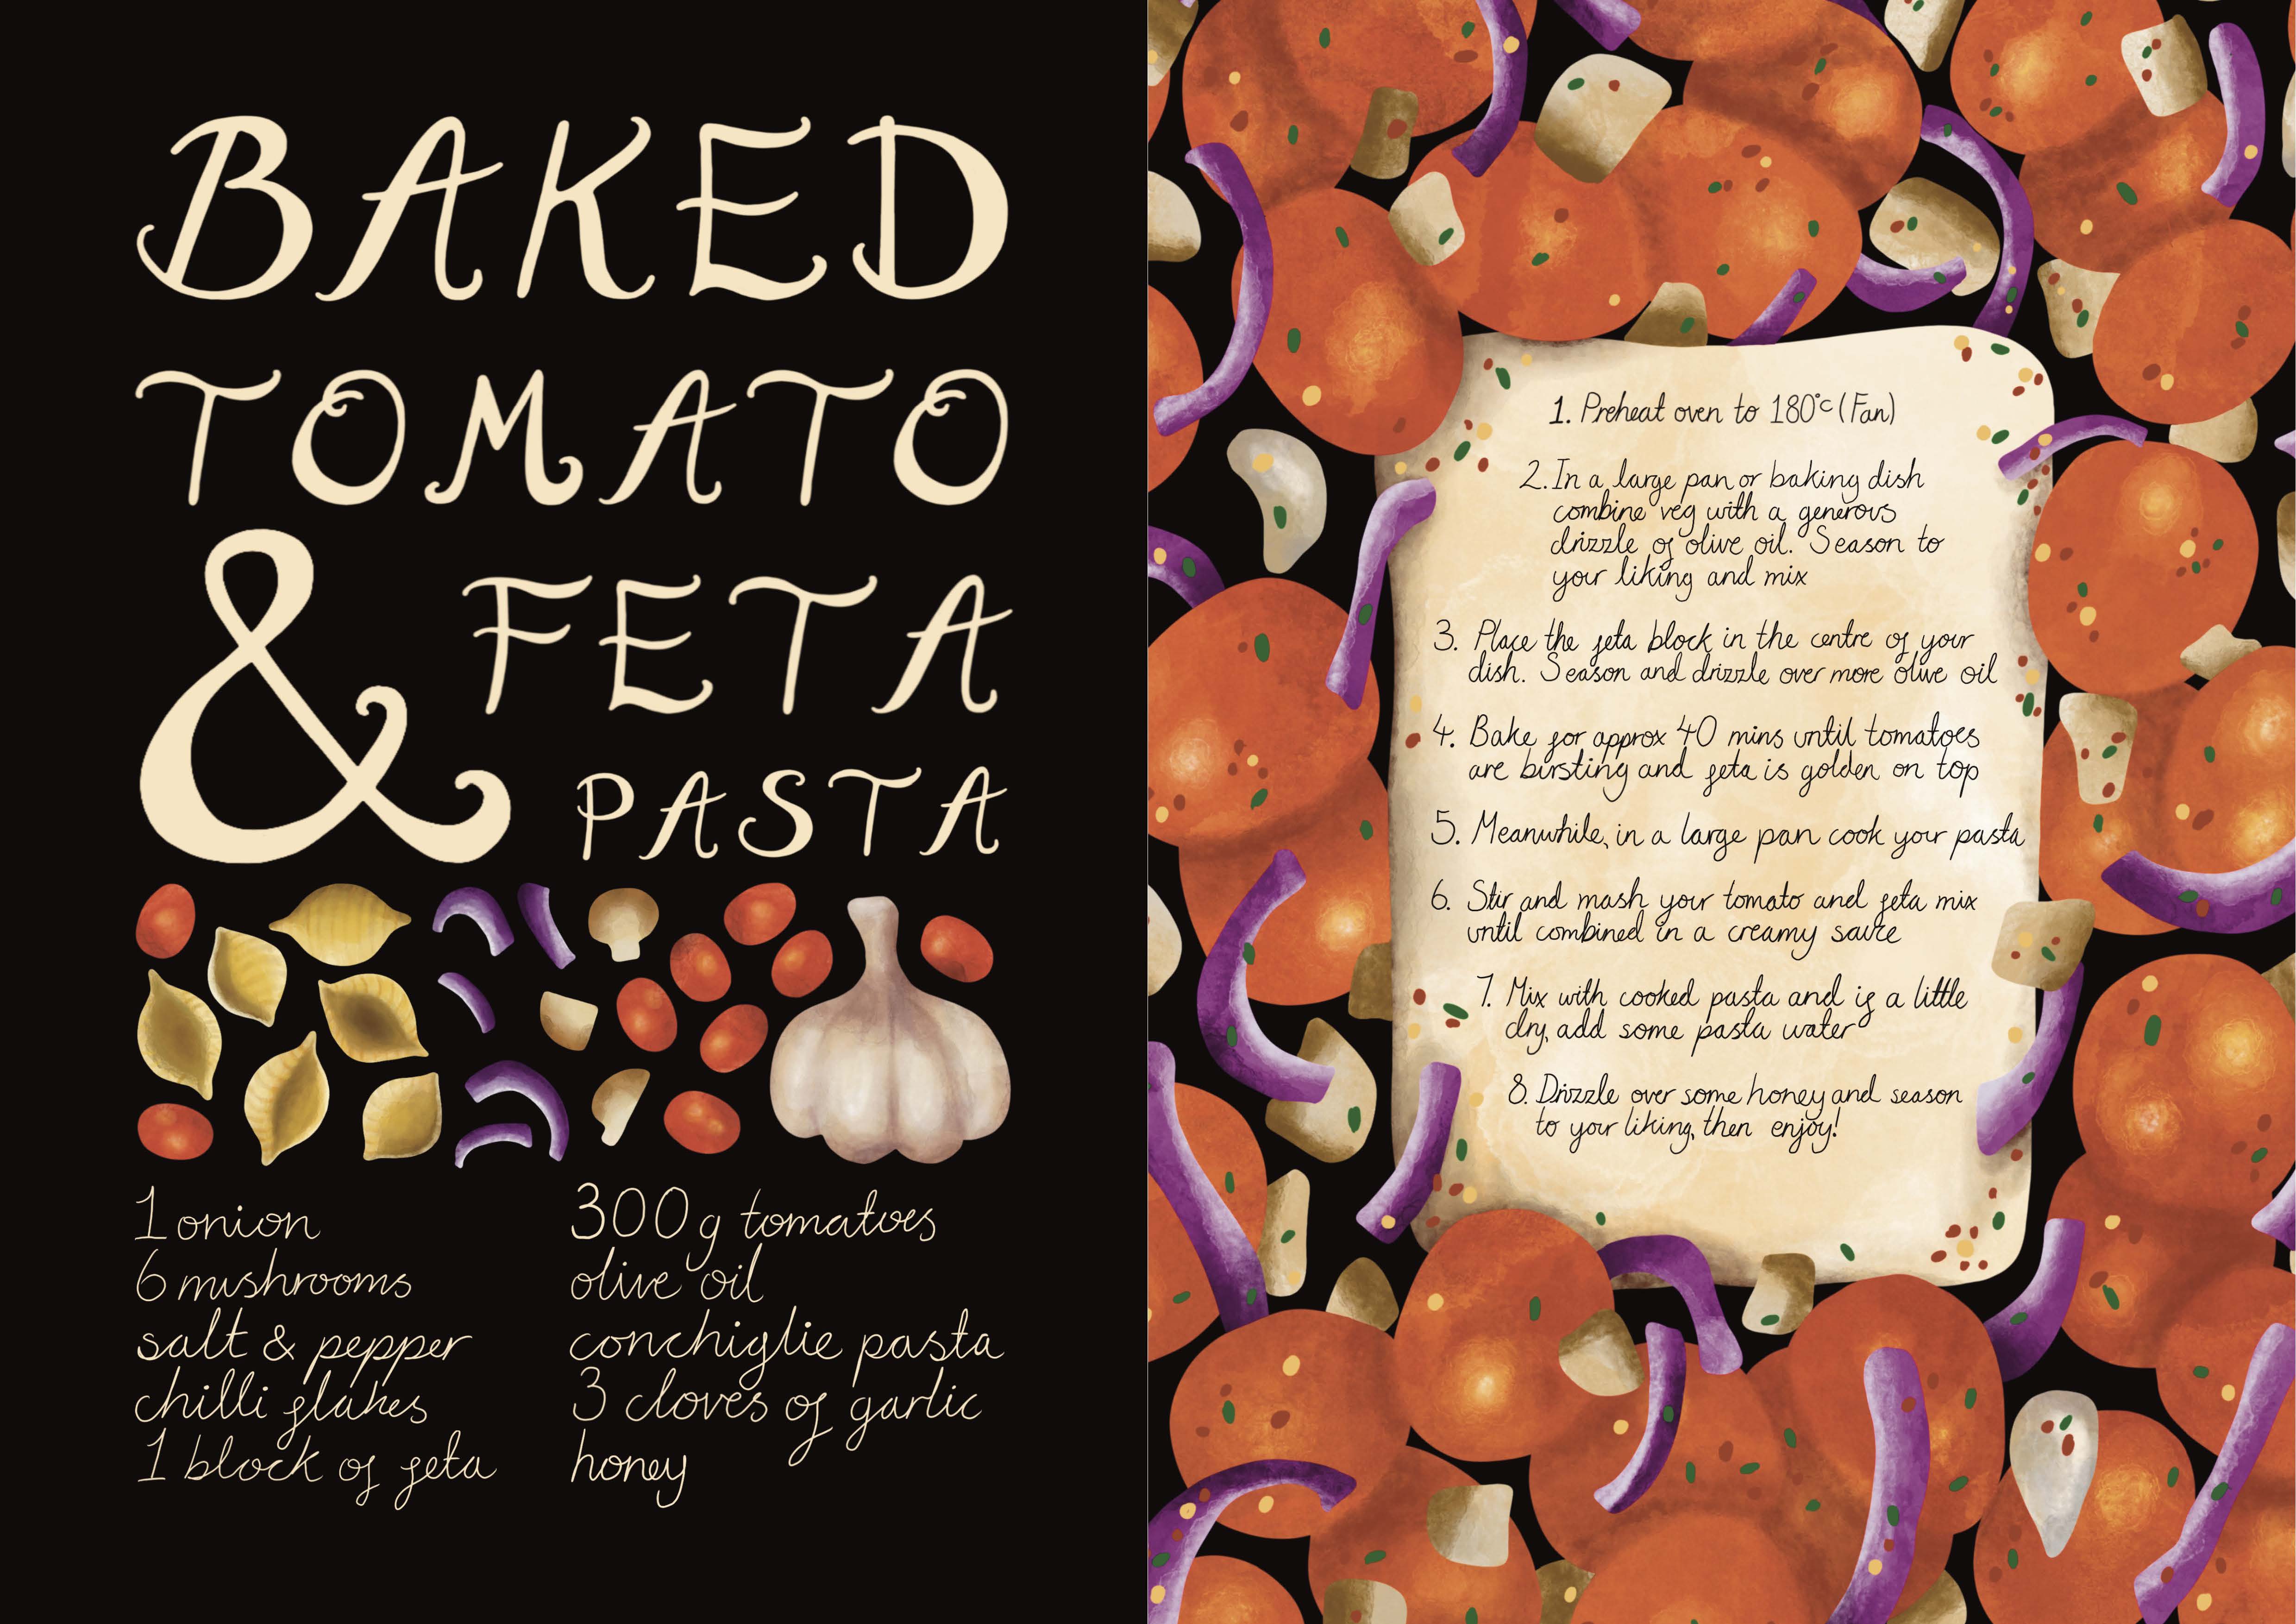 Digitally illustrated baked tomato and feta pasta recipe for Dilly Dally zine. Illustrations of ingredients on left side and handwritten recipe on the right.